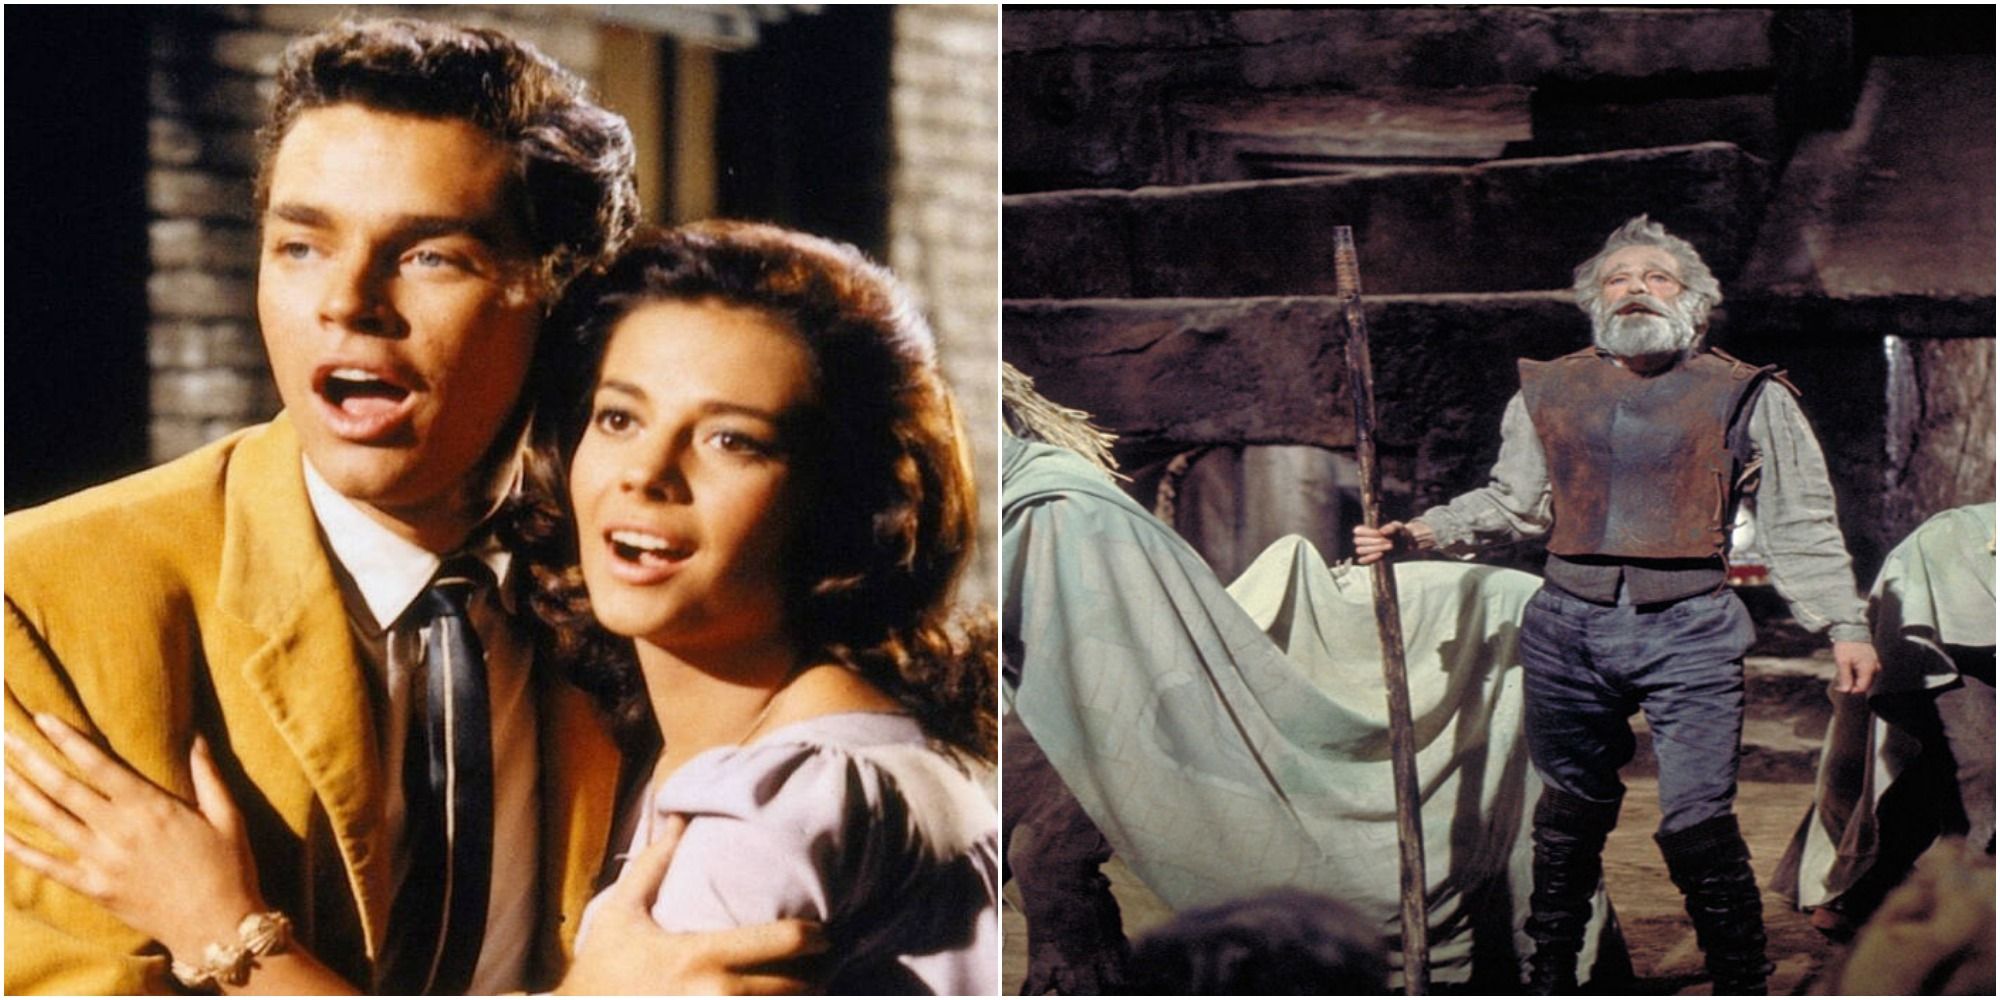 West Side Story and Man of La Mancha